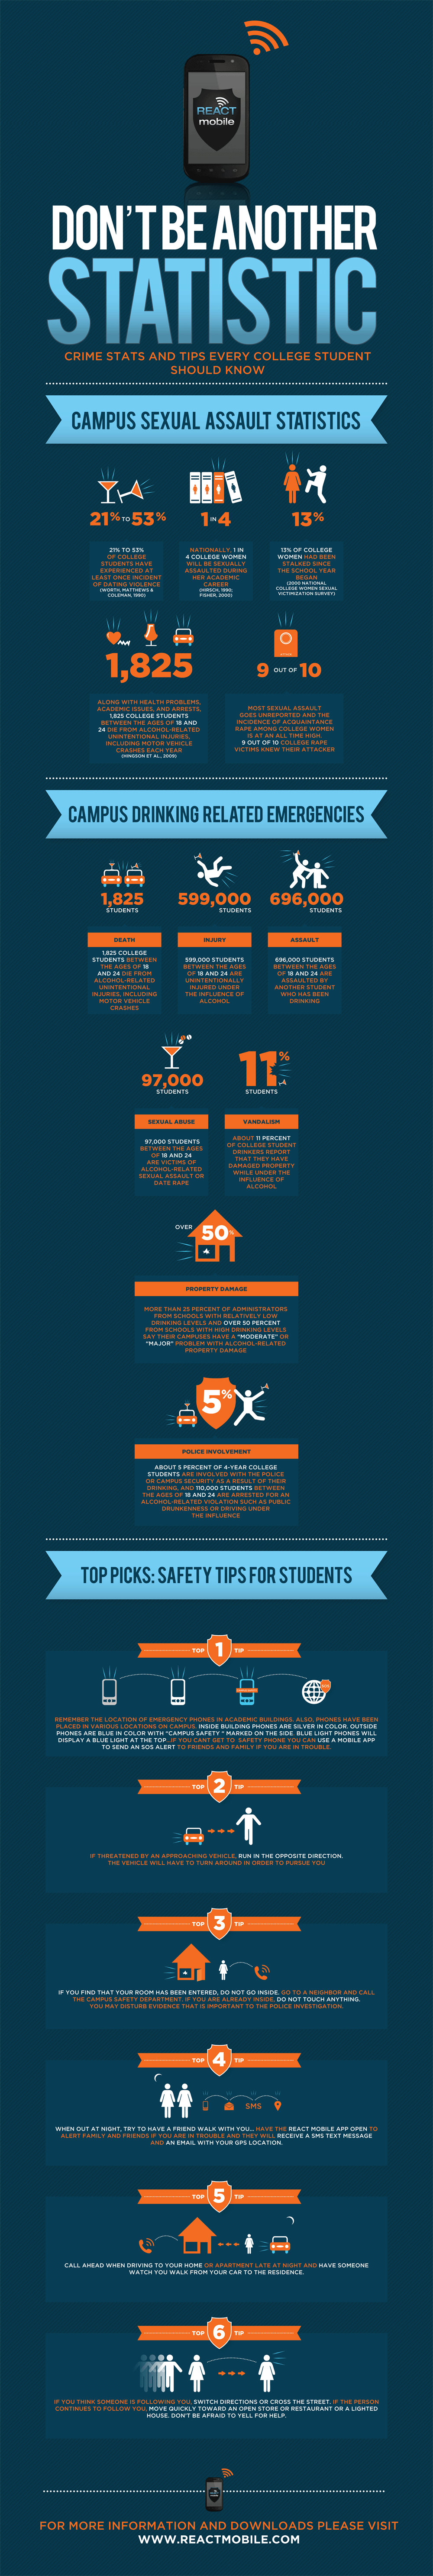 Don't Be Another Statistic - College Infographic